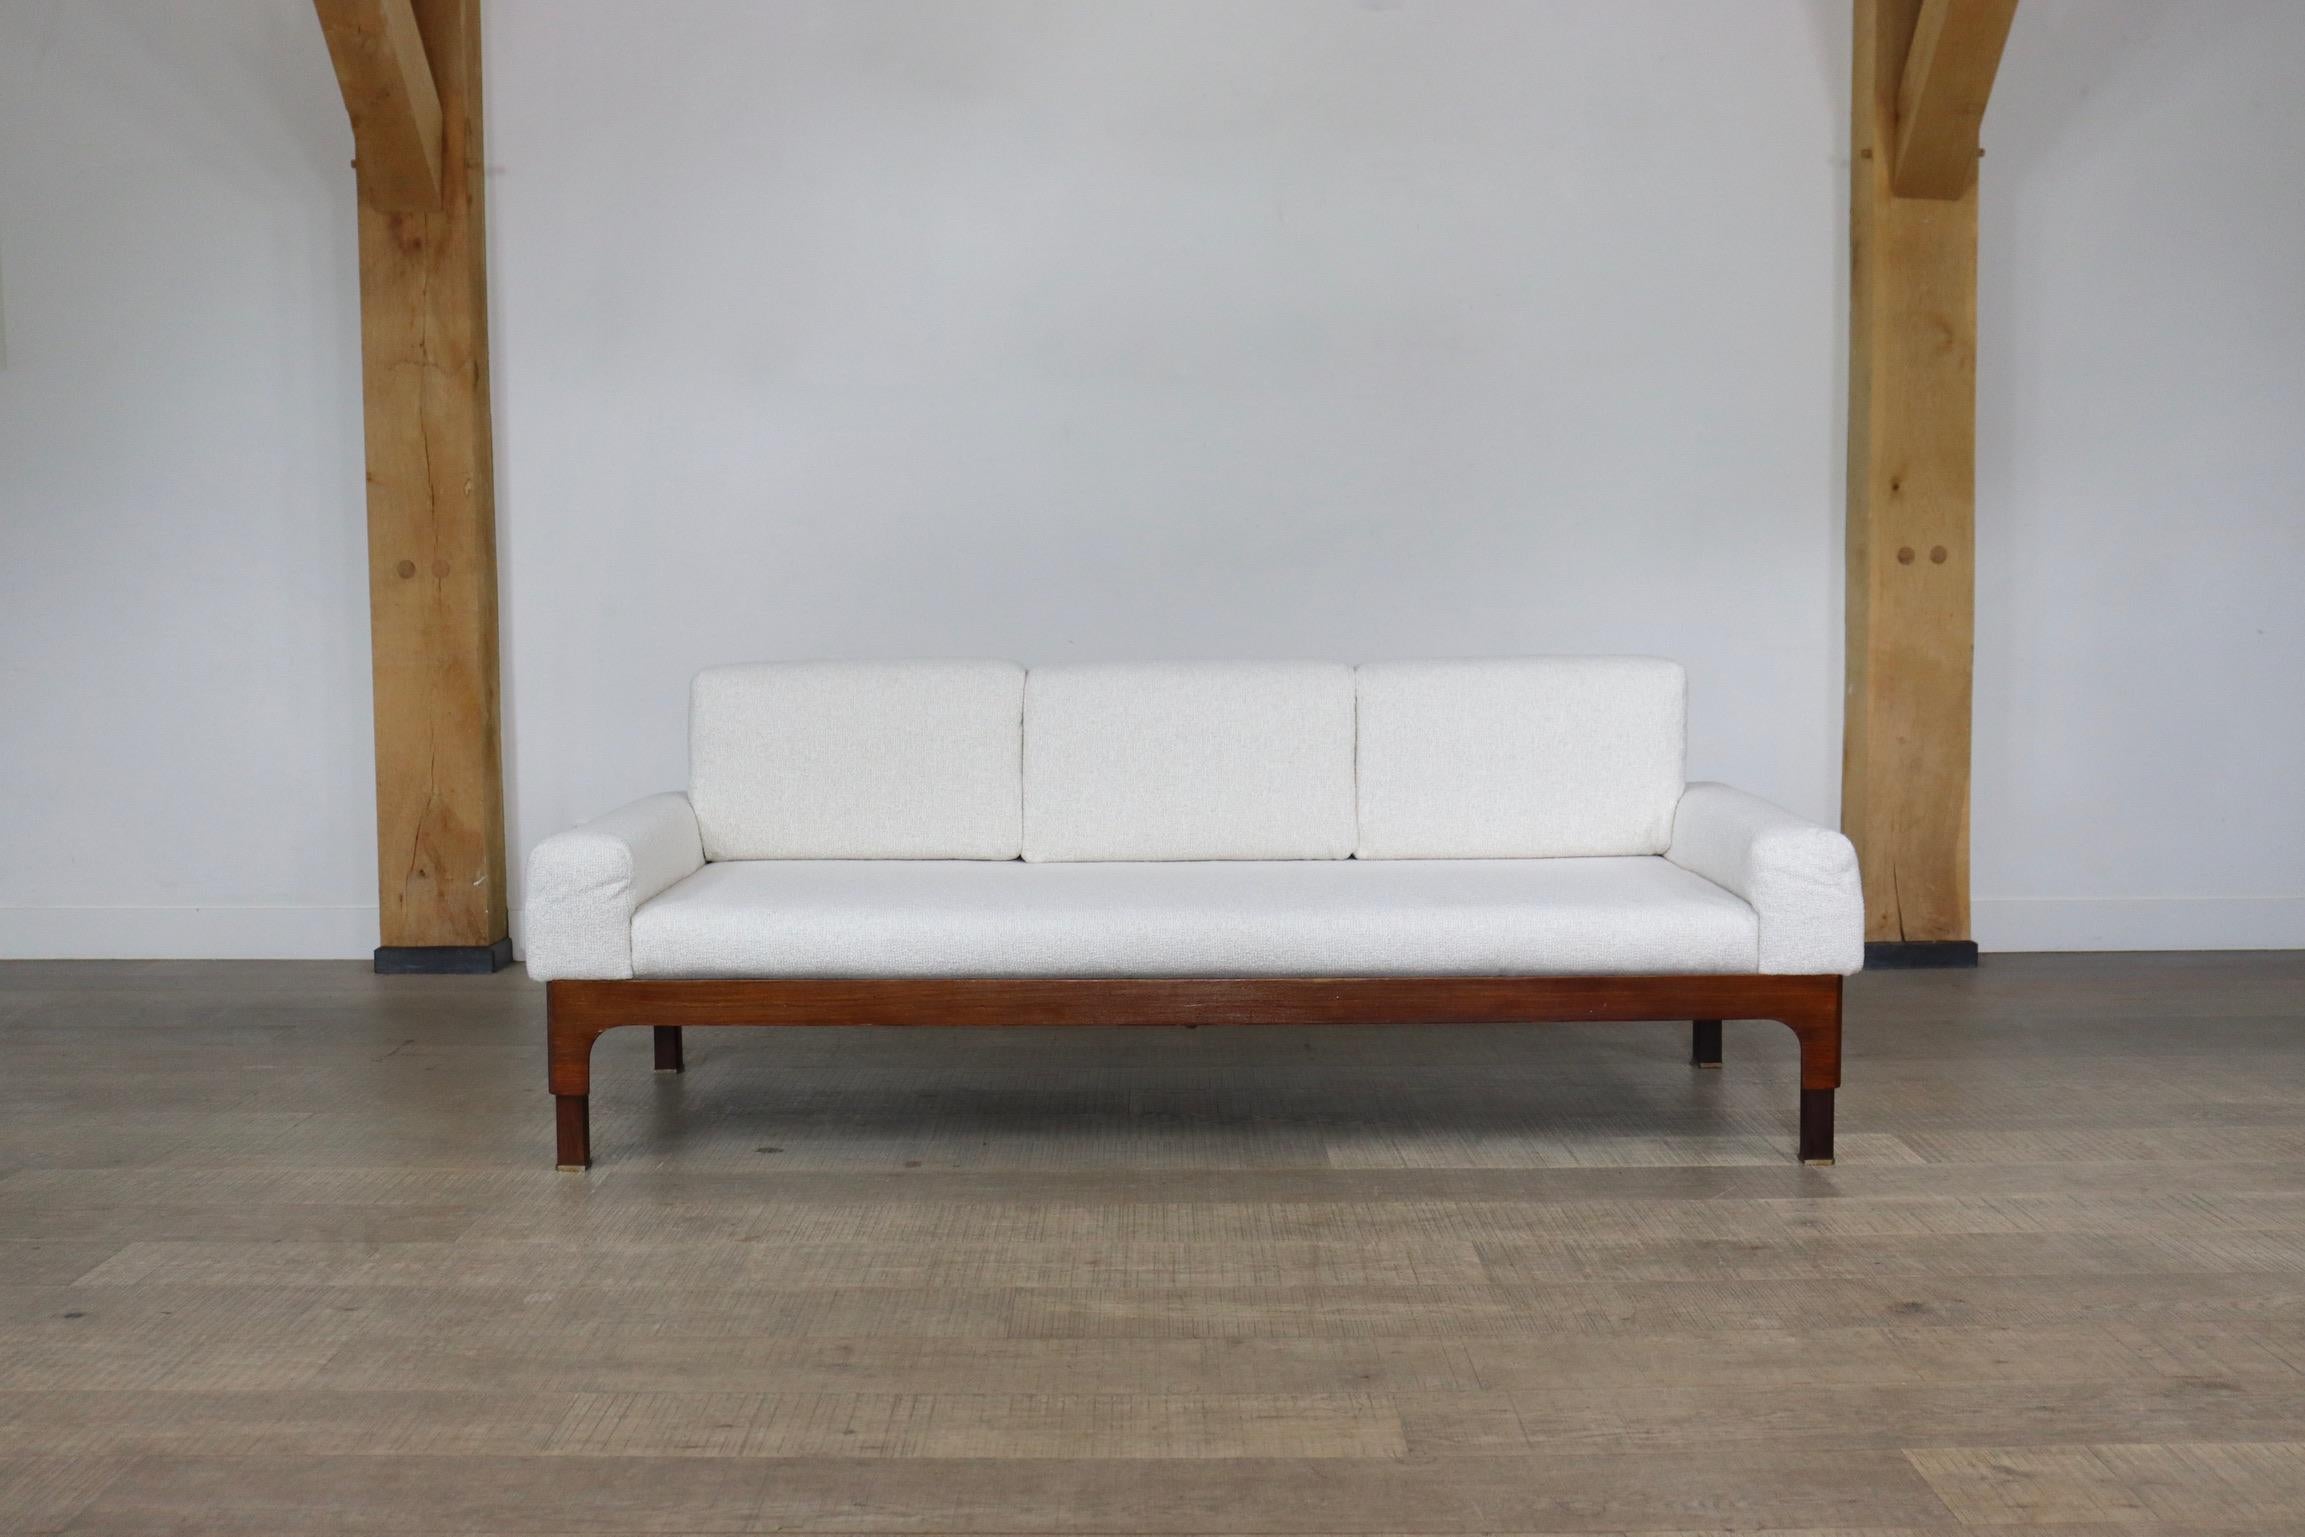 Amazing ‘Romantica’ sofa by Piero Ranzani for Elam in rosewood, Italy 1950s.
The straight lines of the wood construction stand out beautifully against the rounded shapes of the cushions and the seating. Some nice detailing can be found back in the